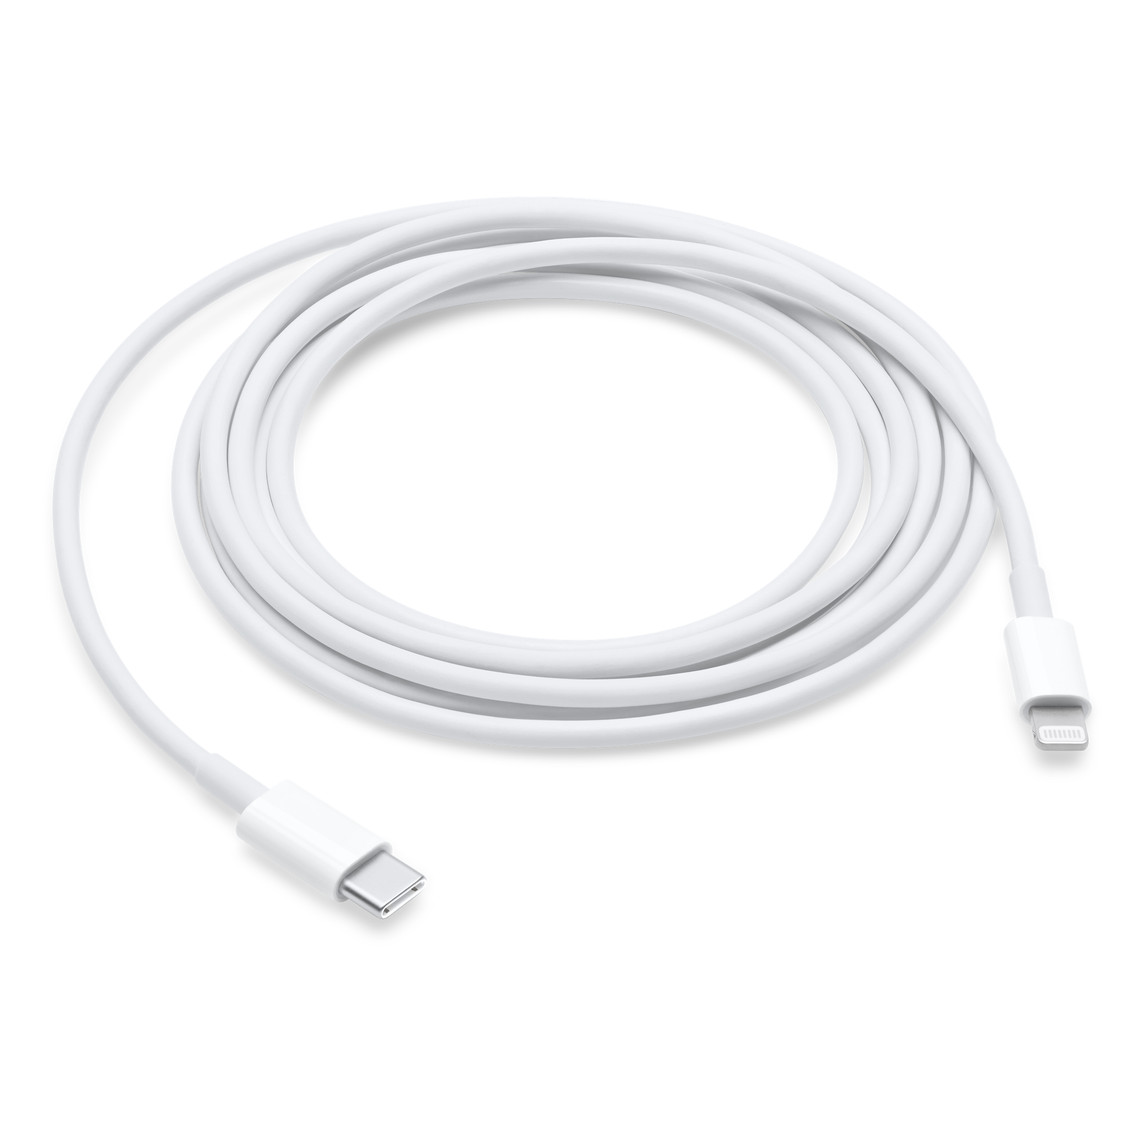 2-metre USB-C to Lightning cable connects a device with Lightning connector to a USB-C or Thunderbolt 3 (USB-C) enabled Mac, for syncing and charging.